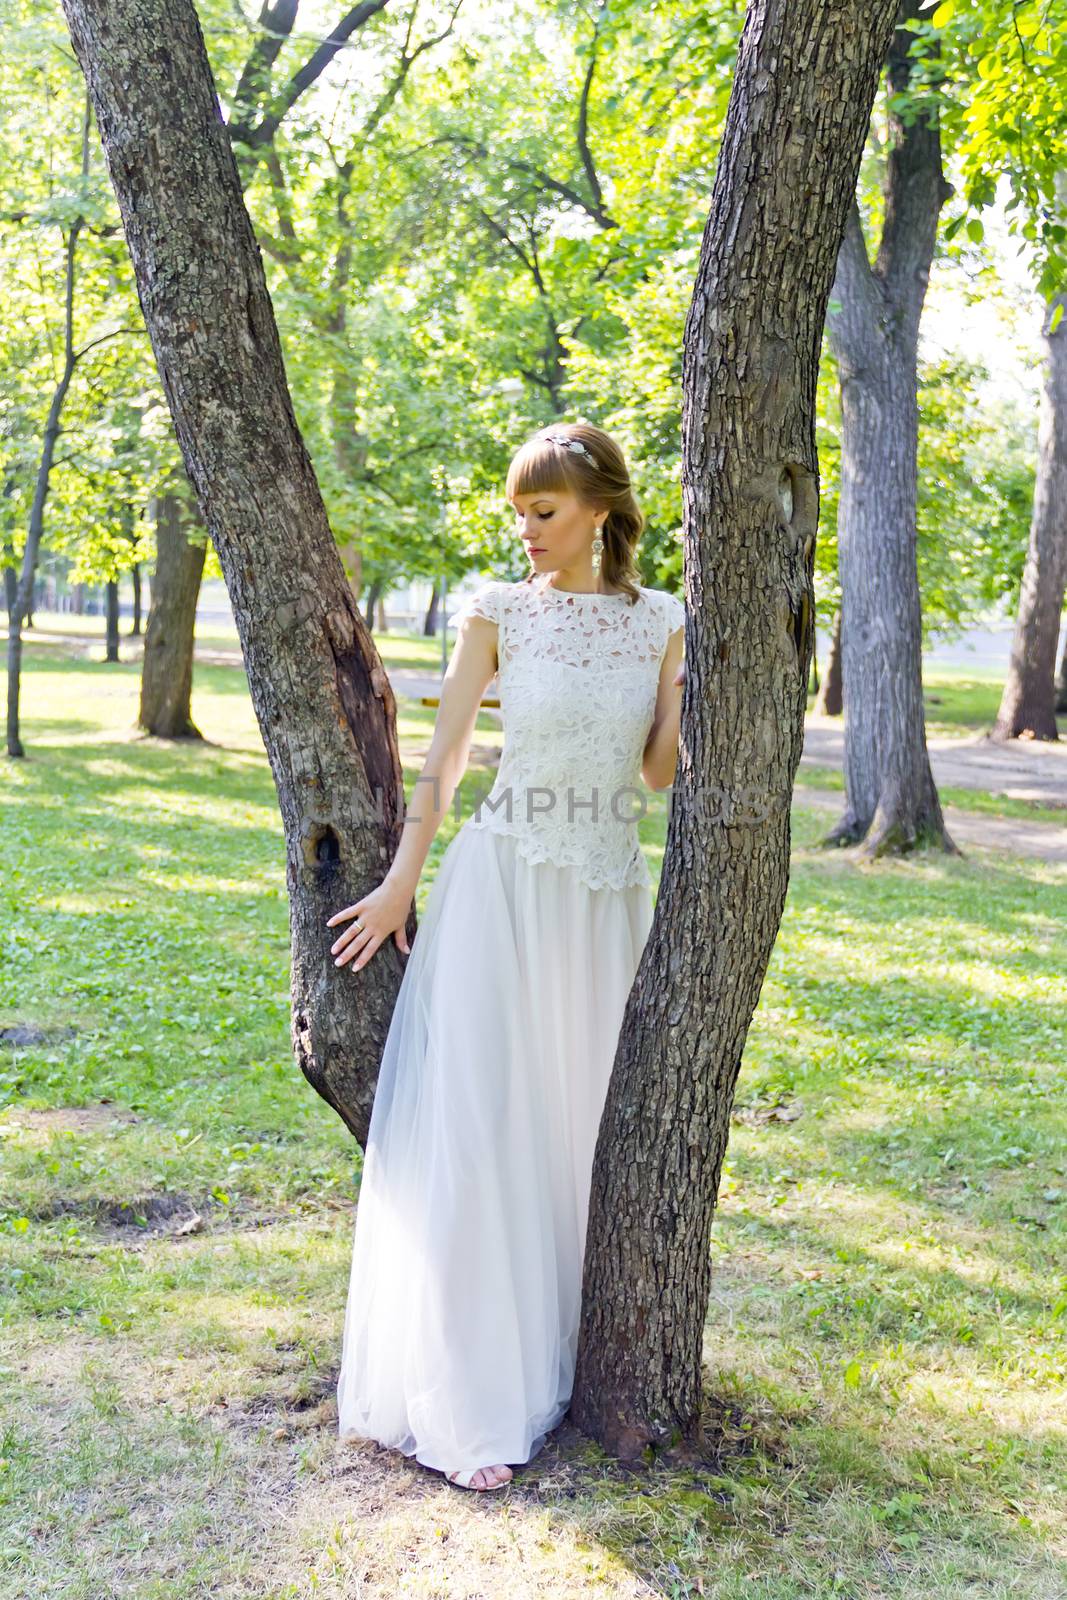 Bride in white lace dress standing near tree at the summer time